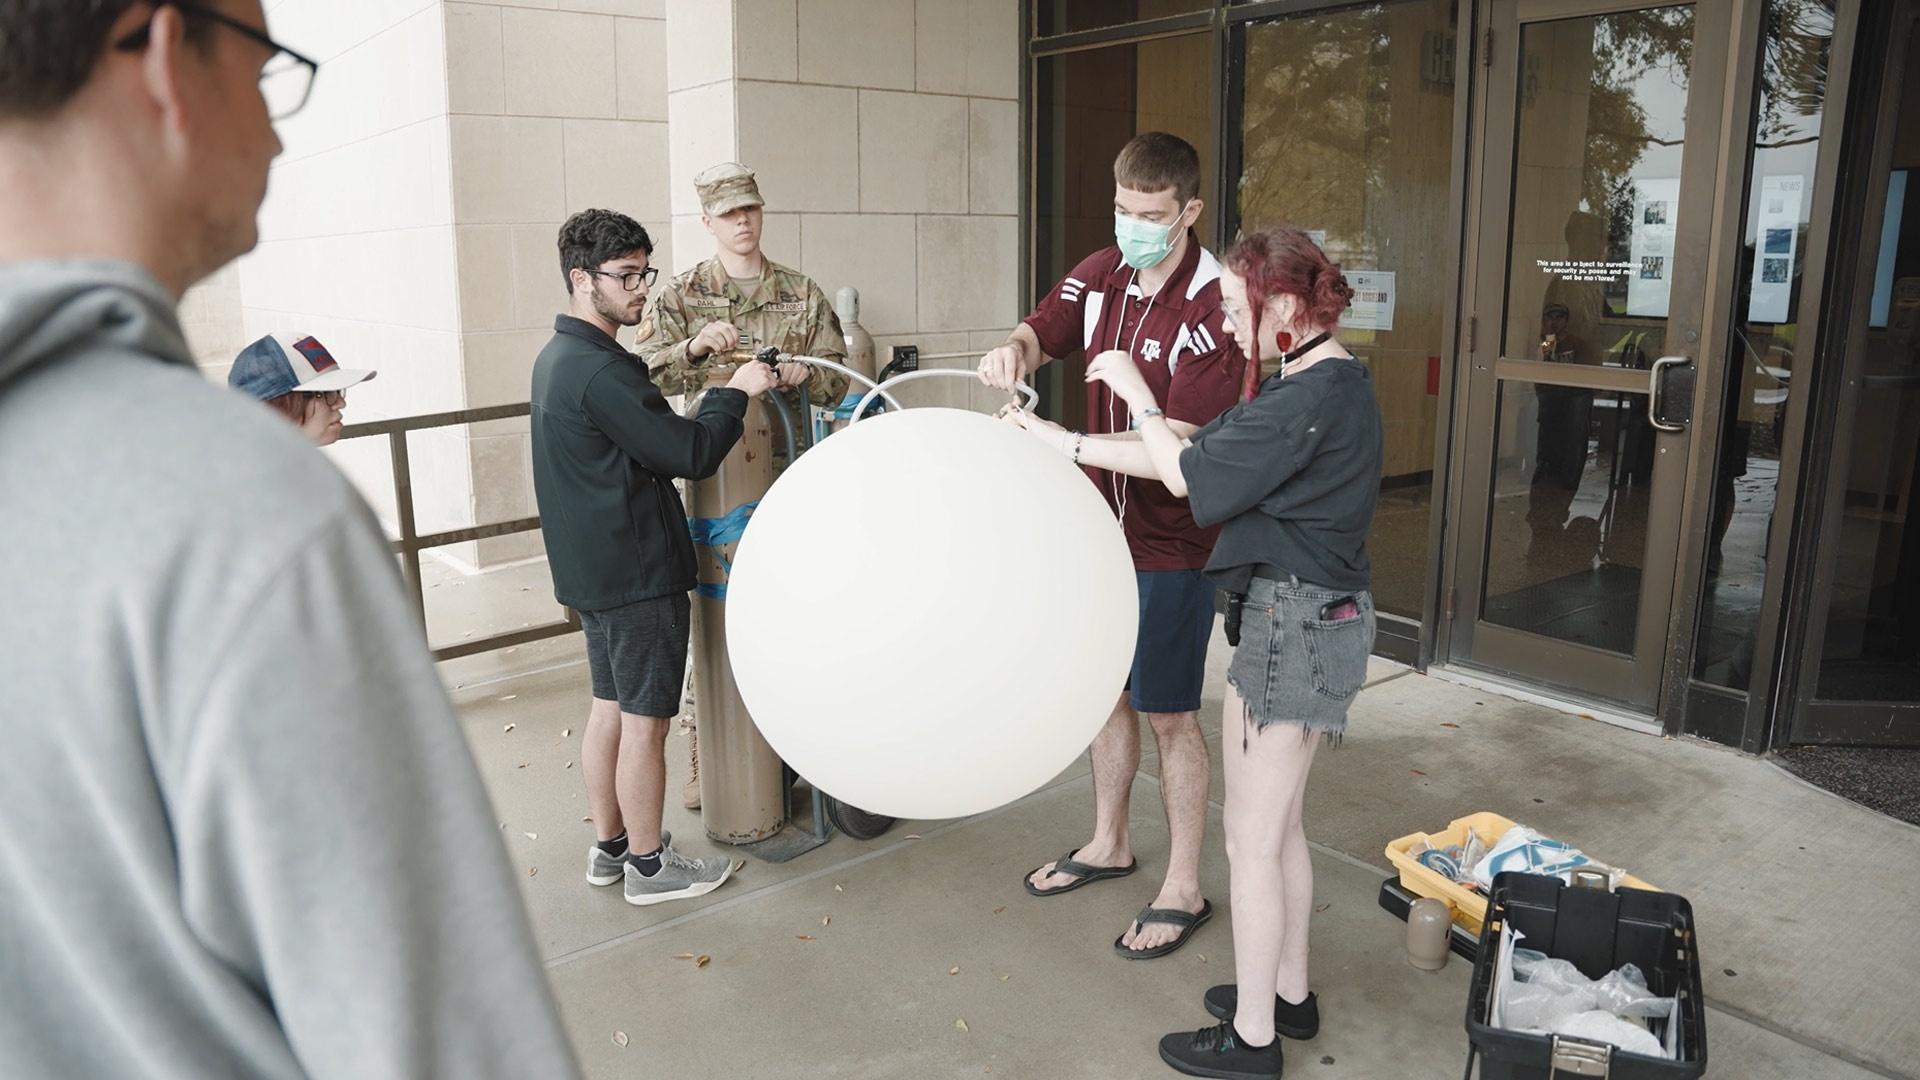 meteorology students prepare to fly a weather balloon